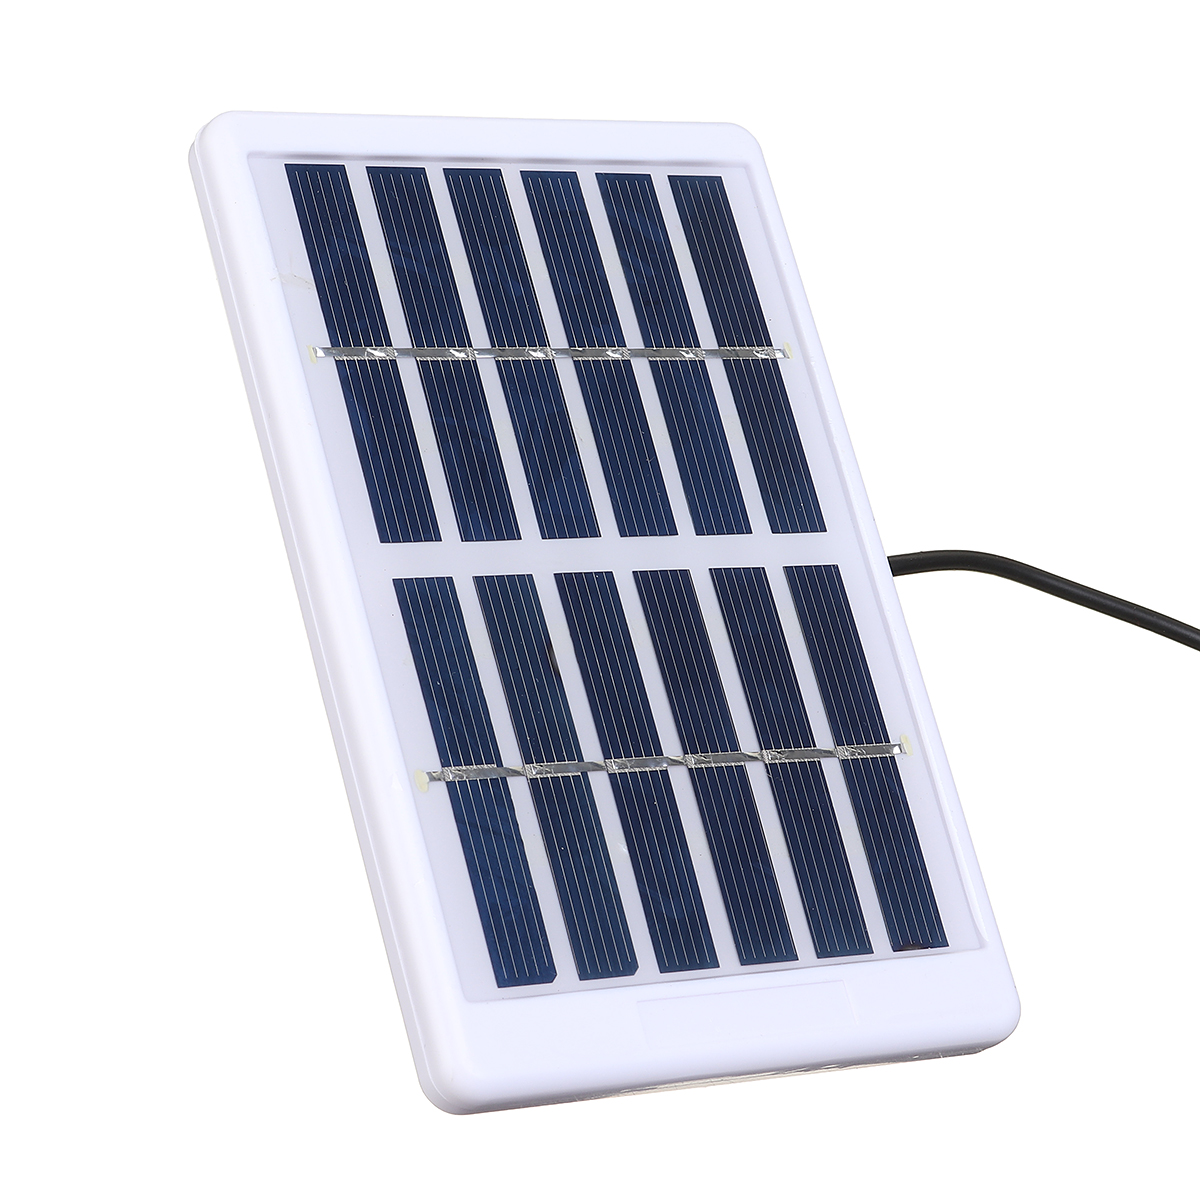 Find Mini 5W 6V USB Solar Panel Polysilicon Solar Power Panel Charger for Sale on Gipsybee.com with cryptocurrencies